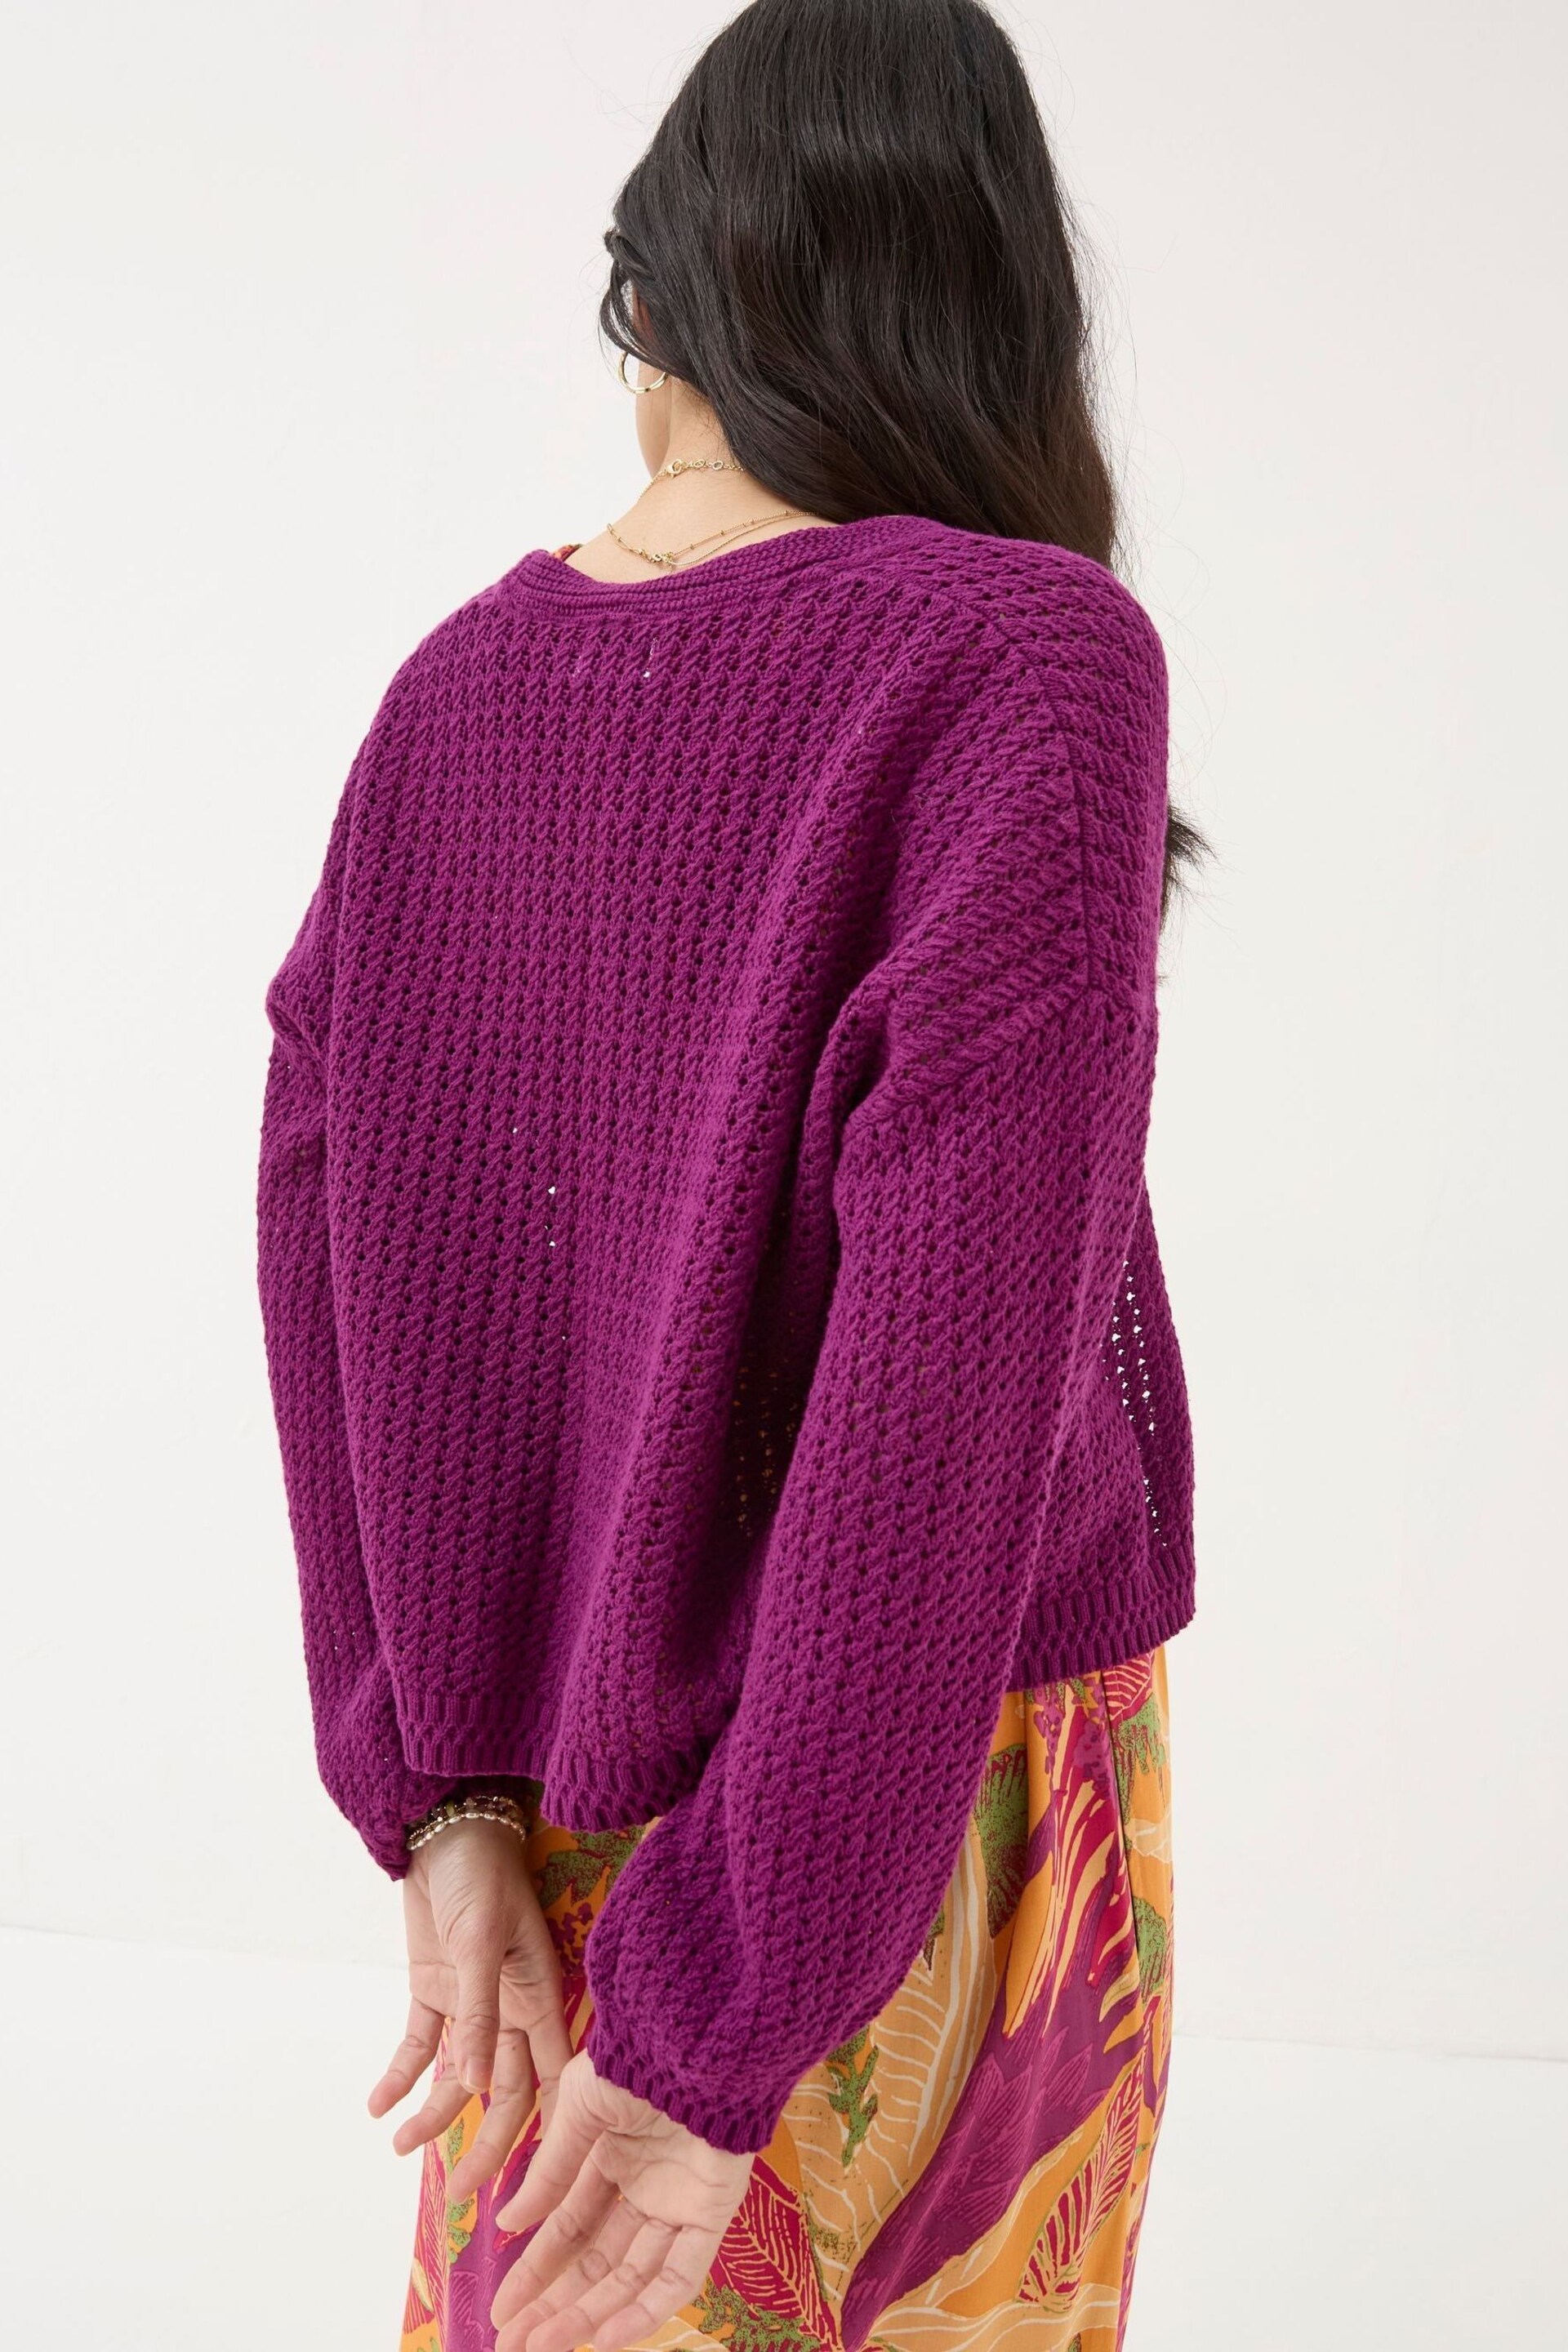 FatFace Red Anna Open Stitch Cardigan - Image 2 of 5